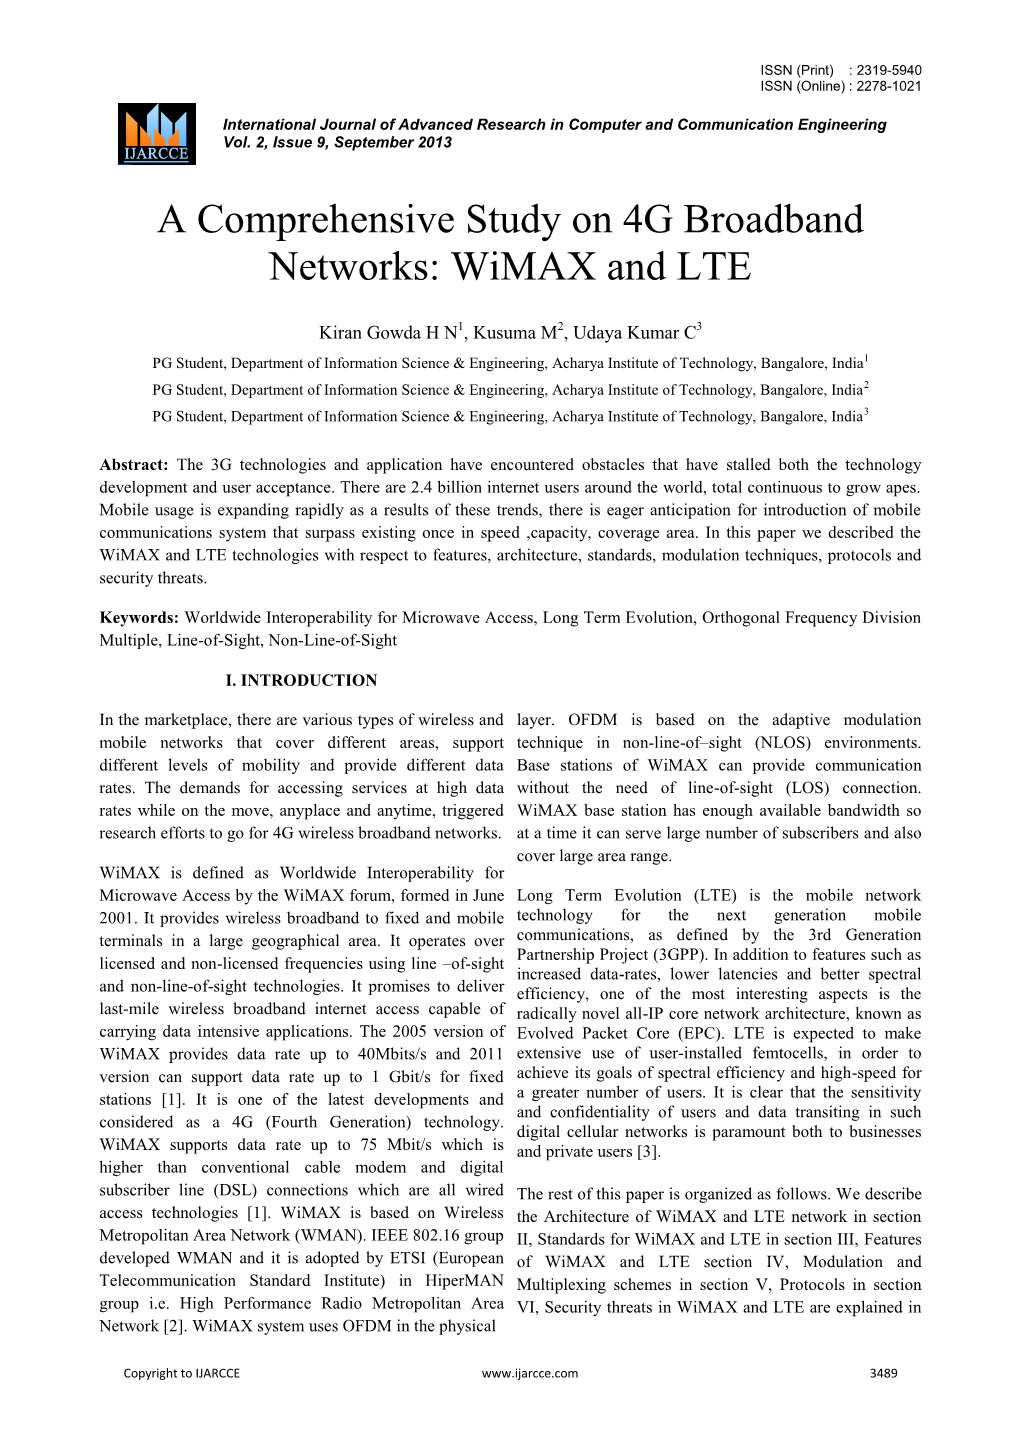 A Comprehensive Study on 4G Broadband Networks: Wimax and LTE